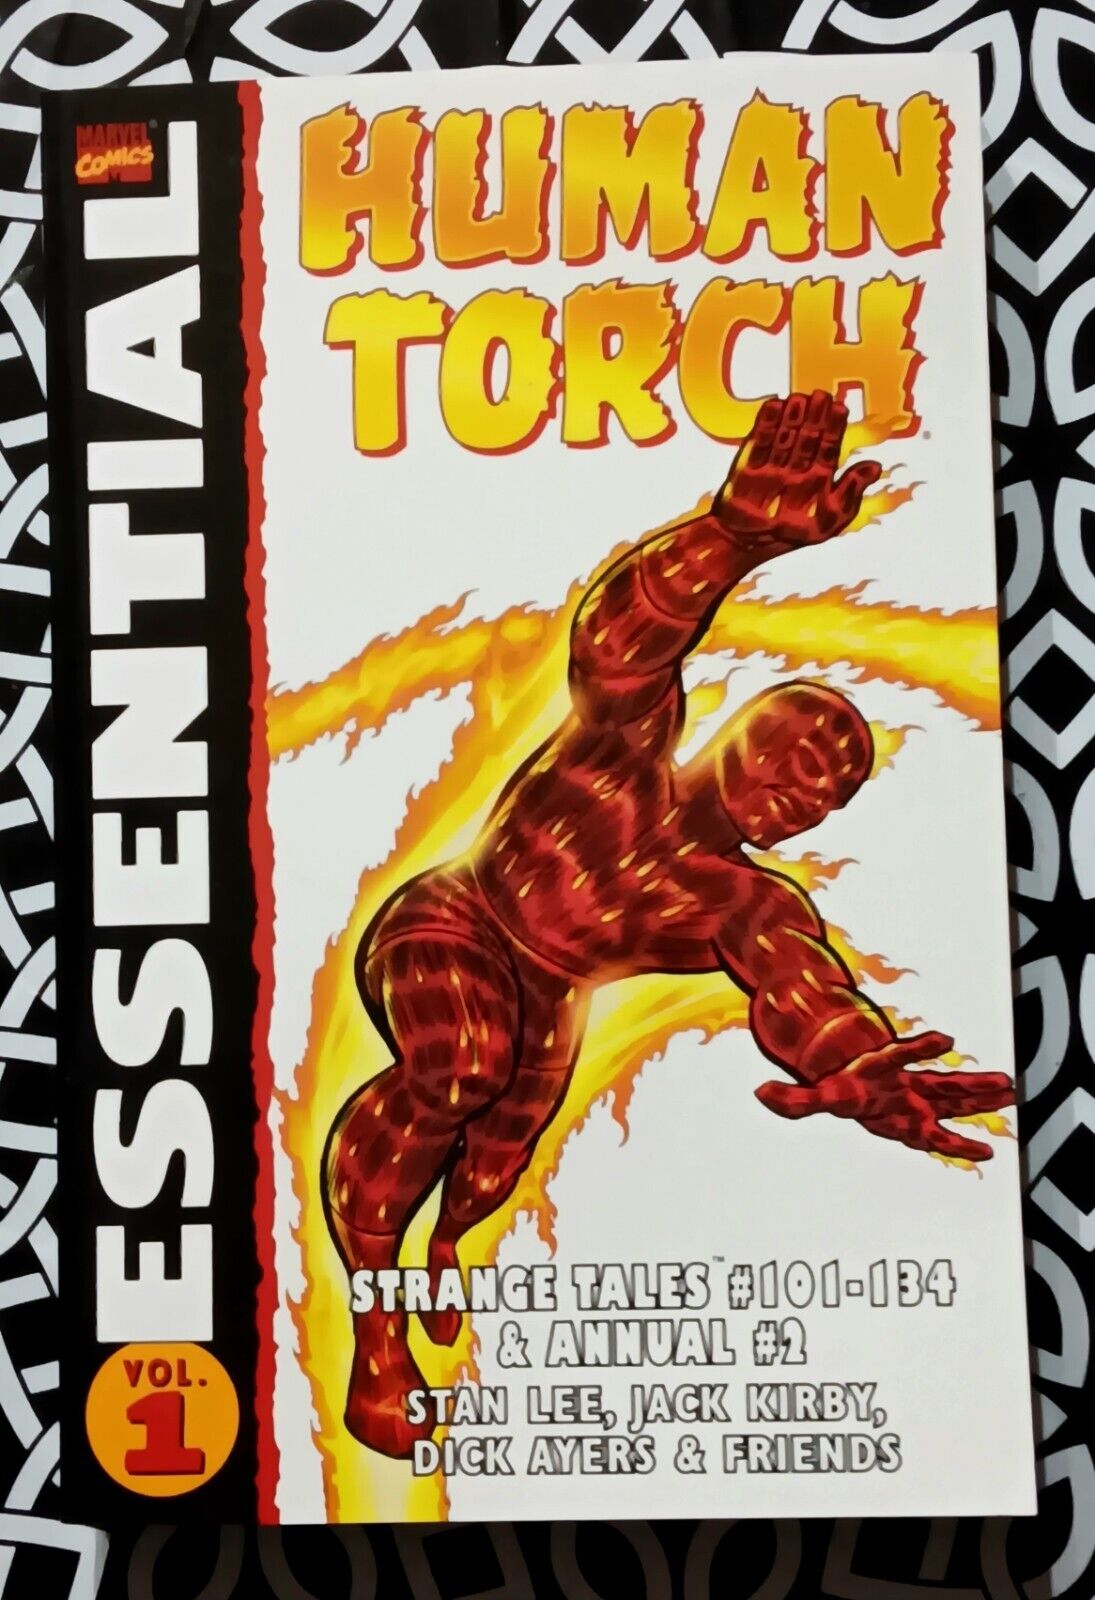 The Essential Human Torch #1 - VF - 2003 - Marvel Comics - Great Book 🔥 